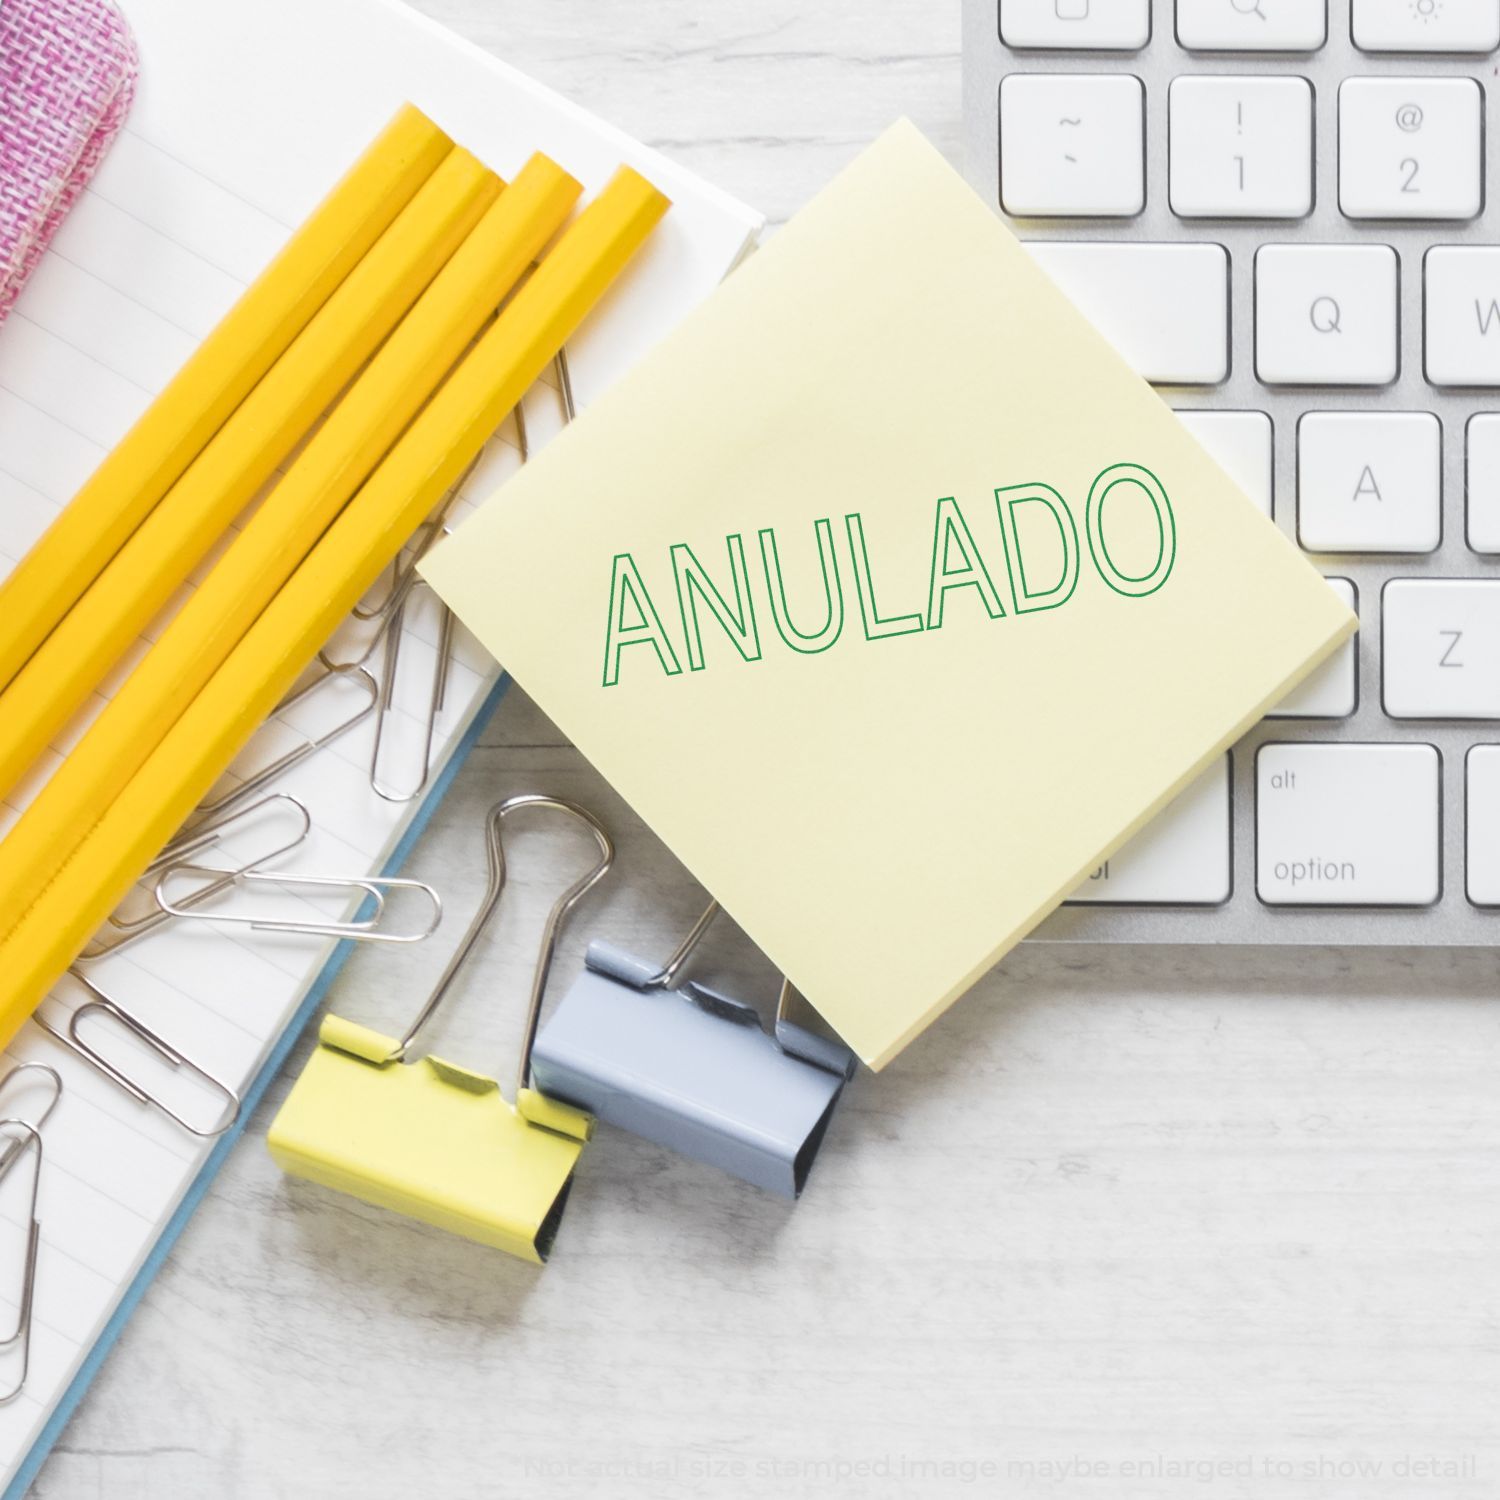 A self-inking stamp with a stamped image showing how the text "ANULADO" in an outline style is displayed after stamping.